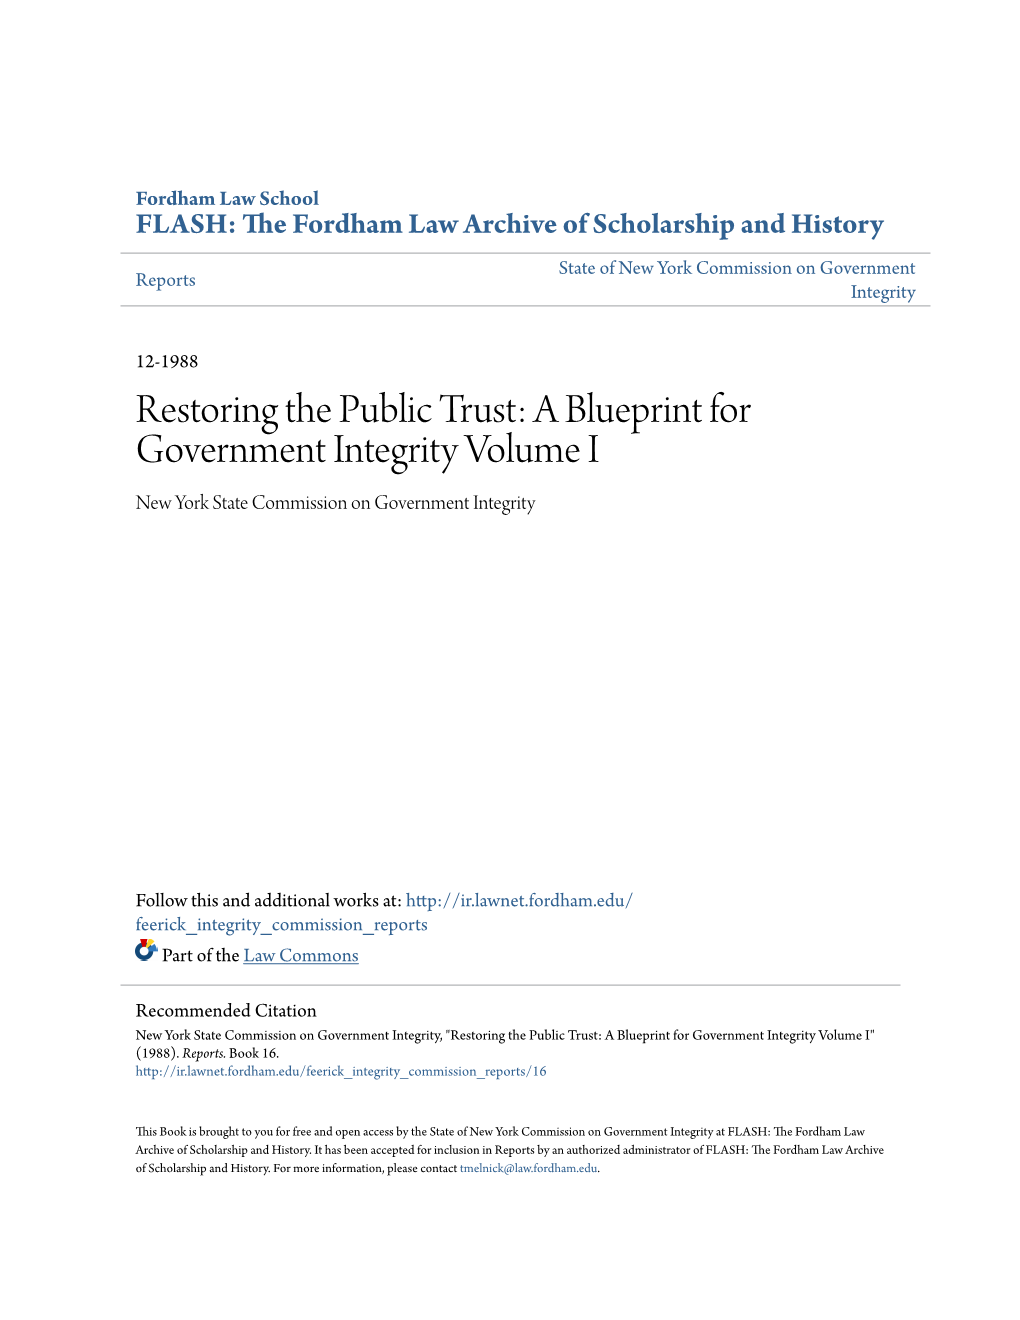 Restoring the Public Trust: a Blueprint for Government Integrity Volume I New York State Commission on Government Integrity